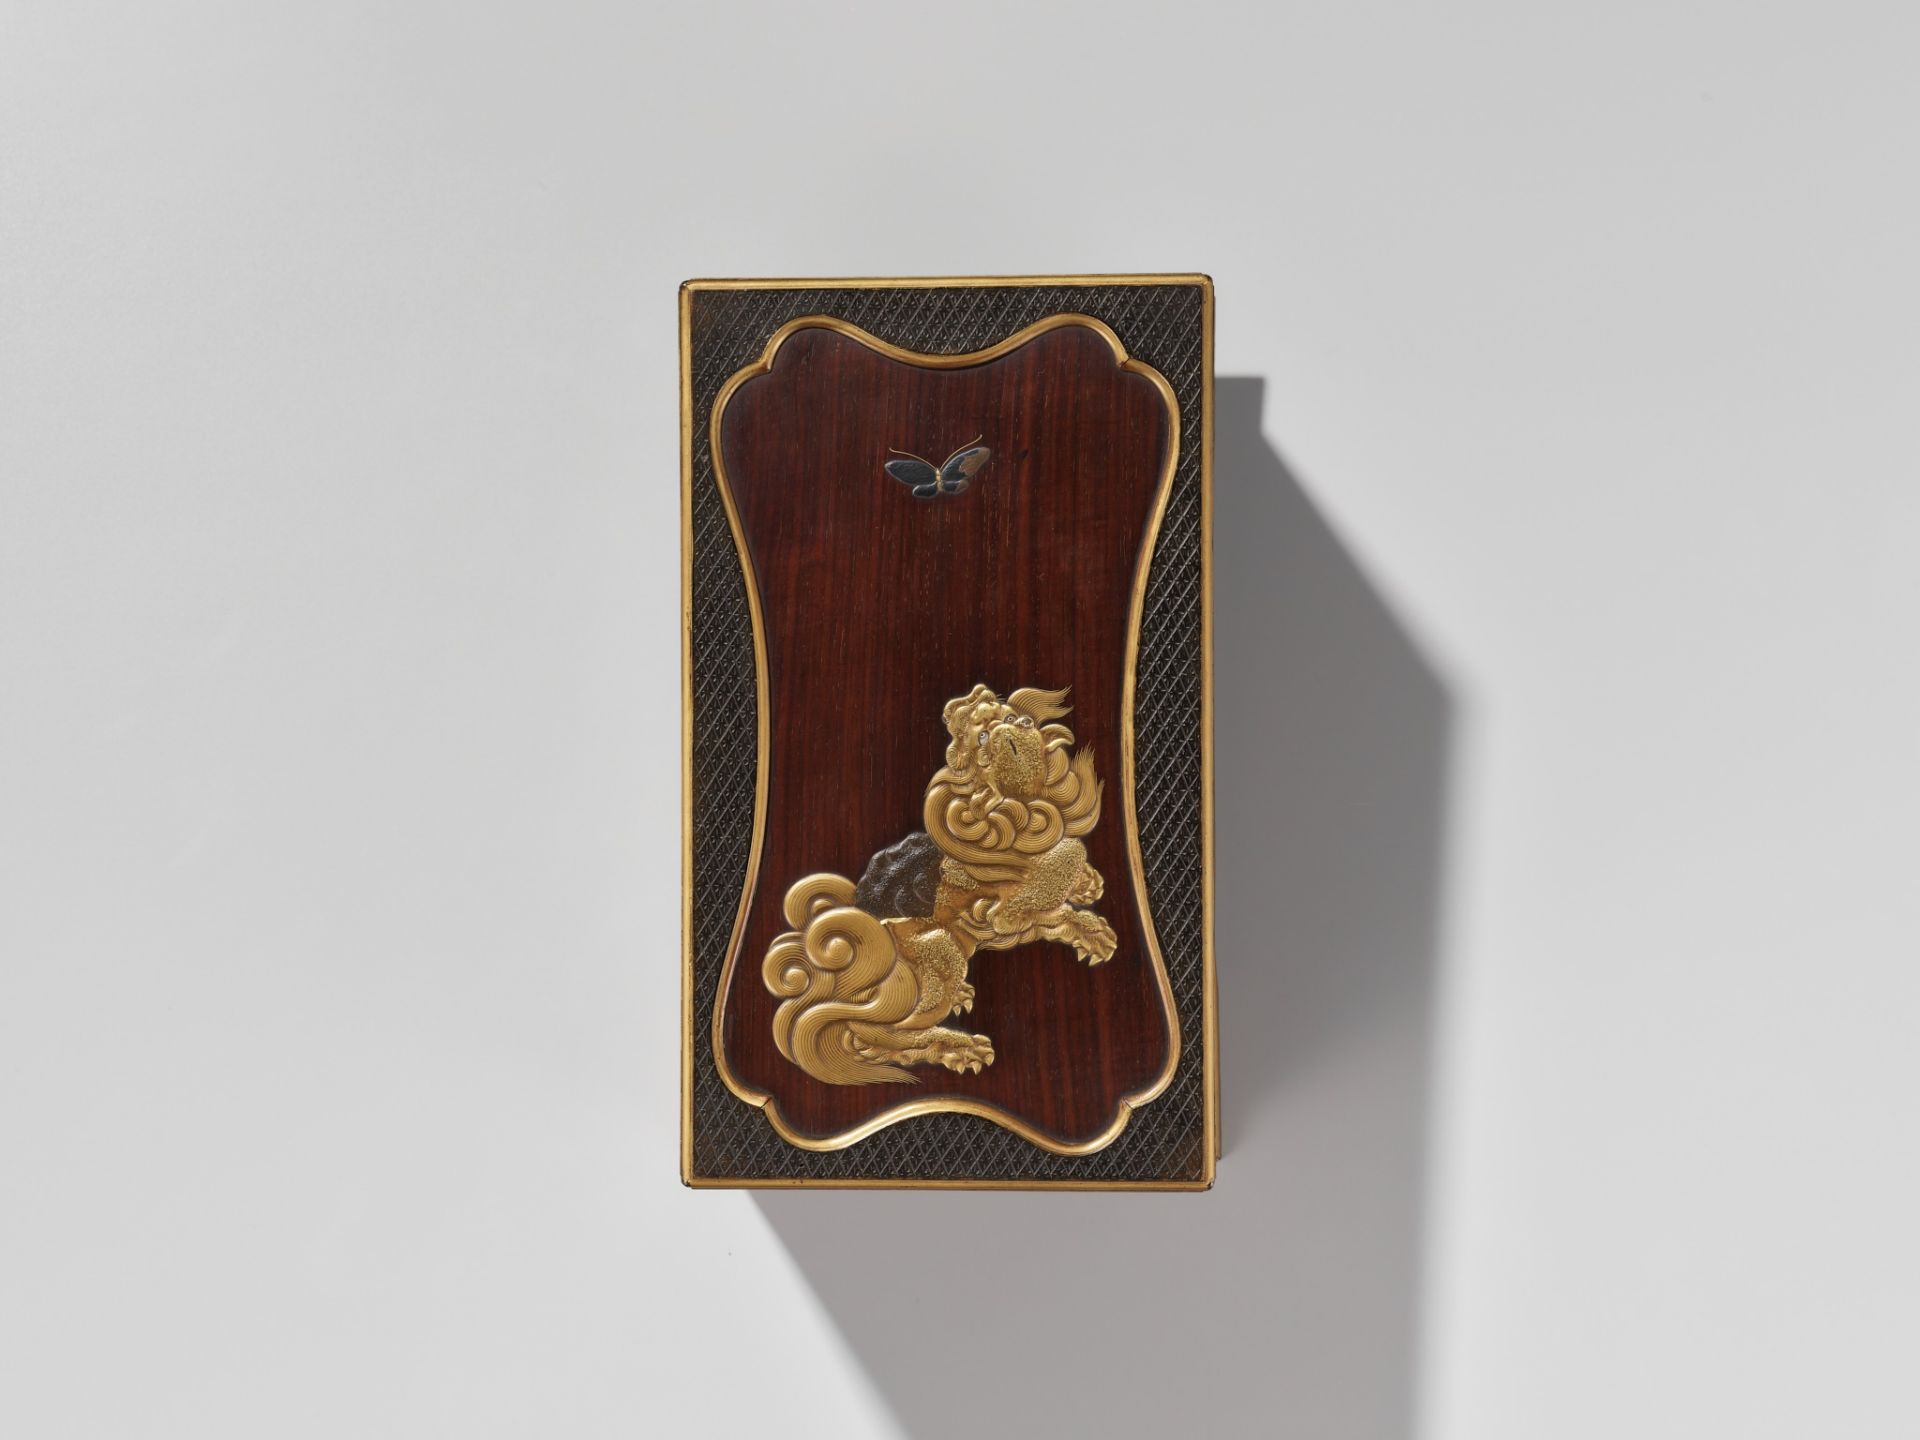 A RARE LACQUERED WOOD SUZURIBAKO (WRITING BOX) DEPICTING A SHISHI AND BUTTERFLY - Image 5 of 9